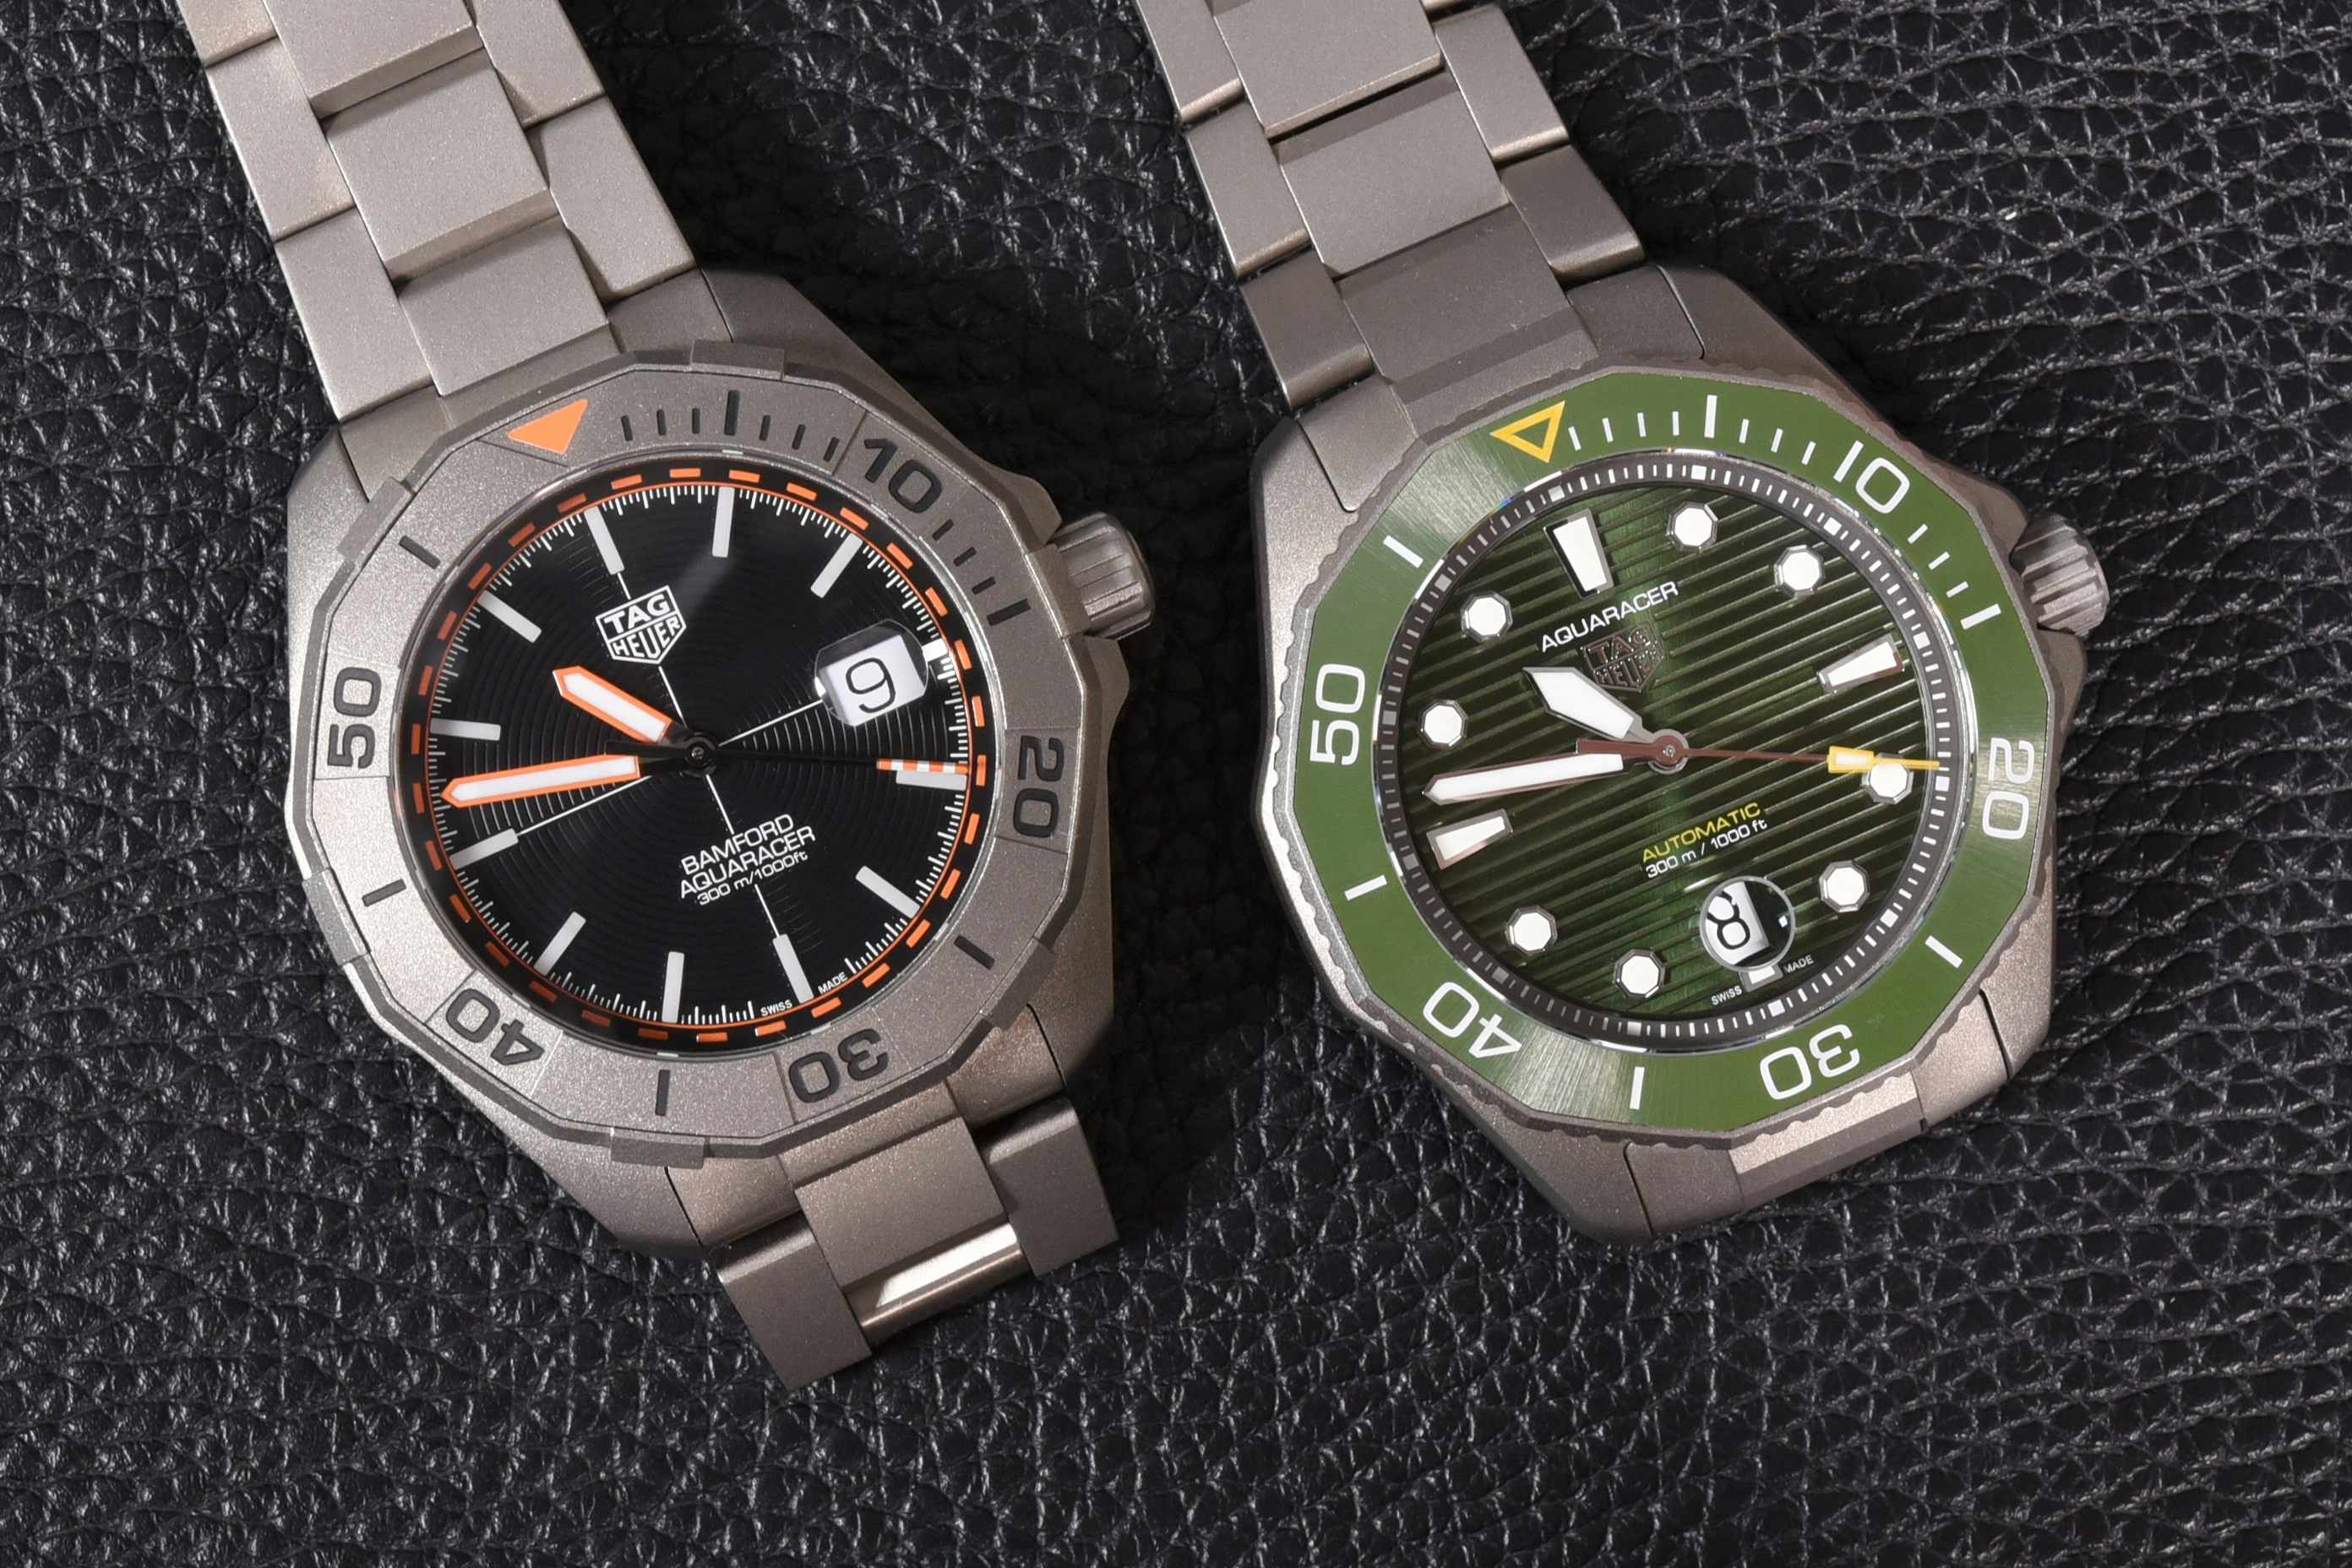 TAG Heuer Debuts Two New Aquaracer Watches In Solid Gold With A